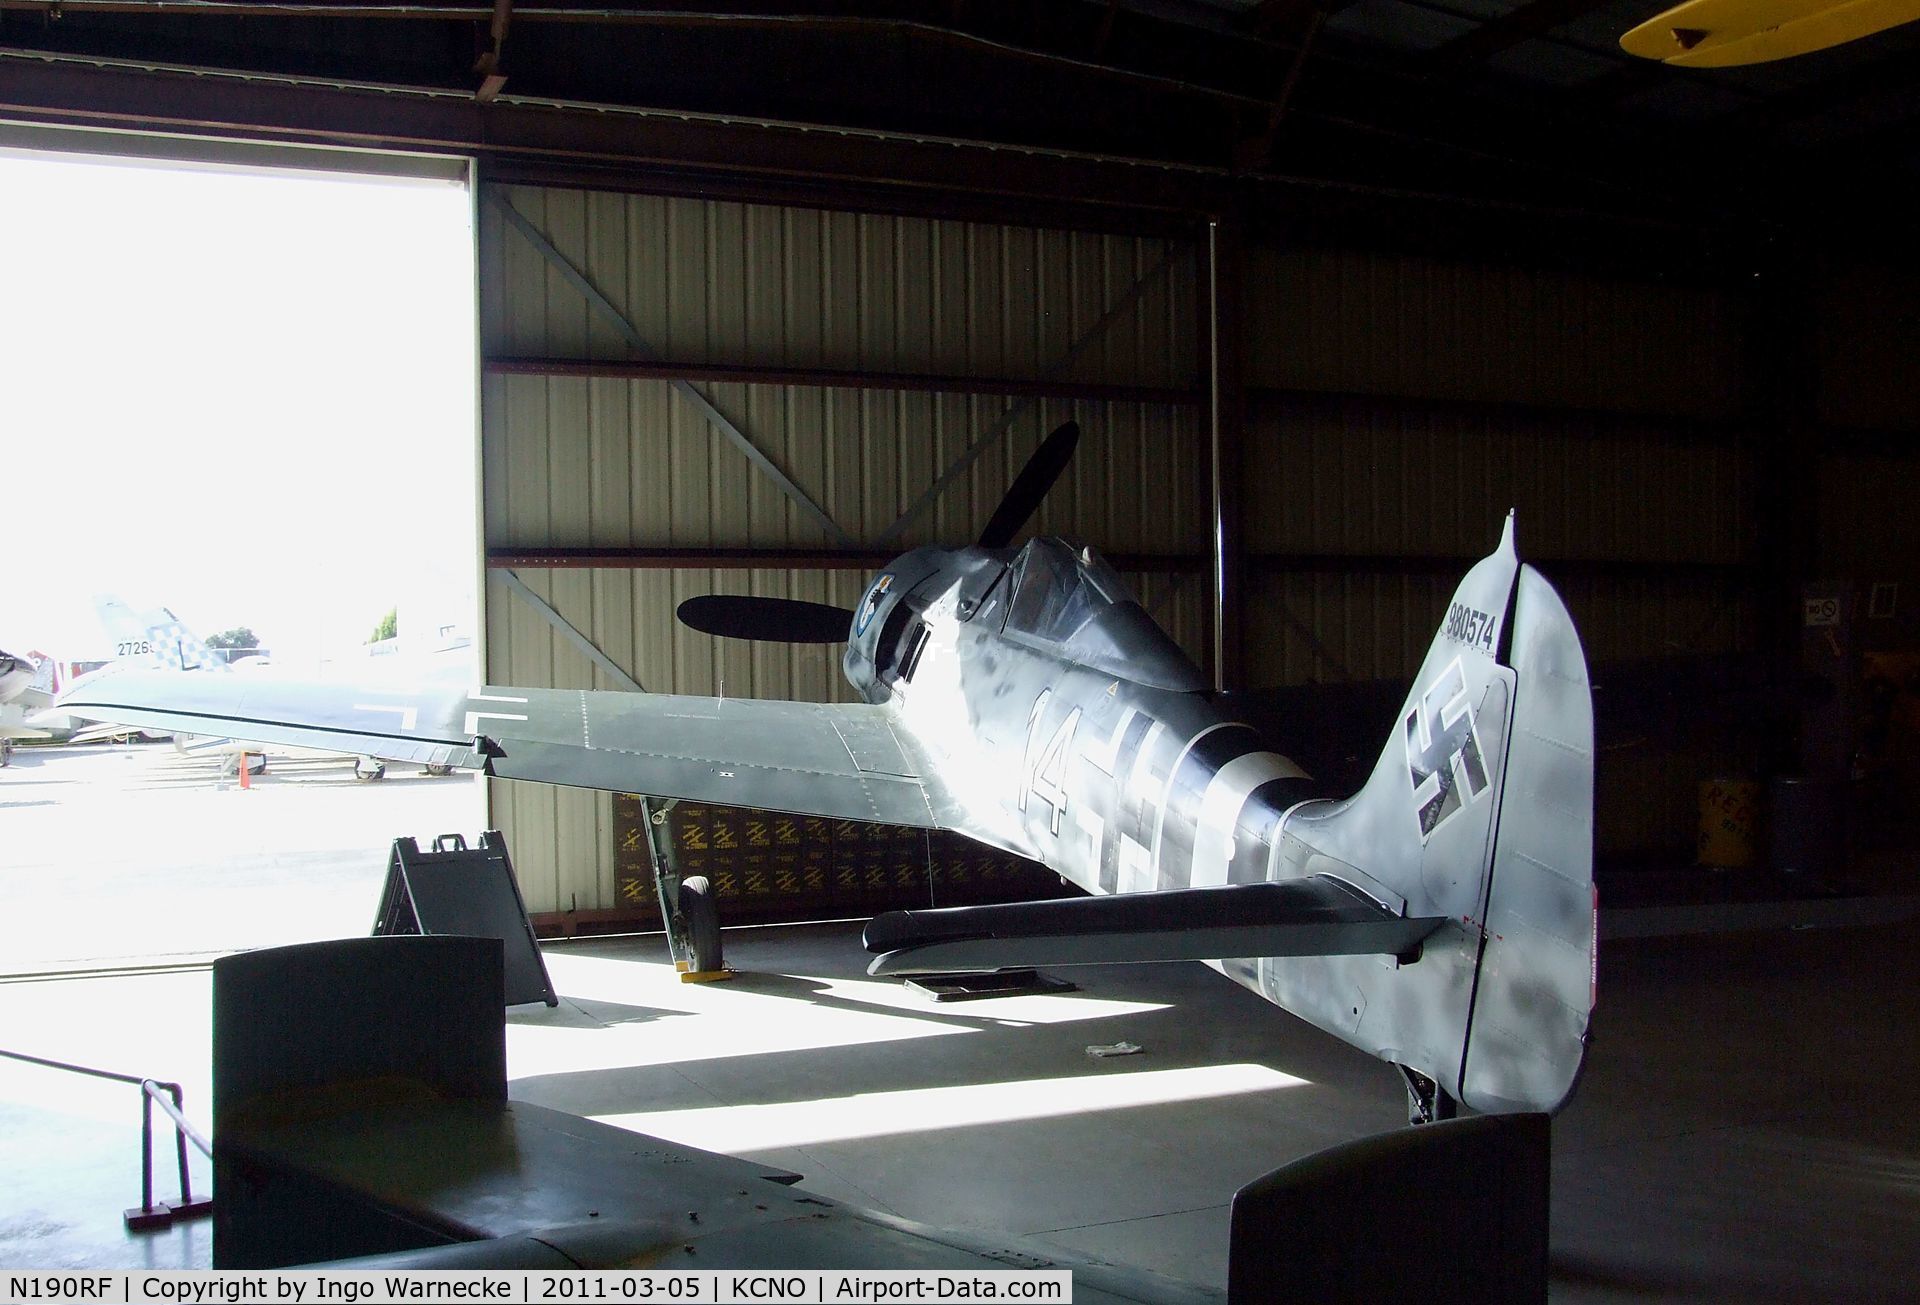 N190RF, Focke-Wulf Fw-190A-9 C/N 980 574, Focke-Wulf Fw 190A-9 at the Planes of Fame Air Museum, Chino CA